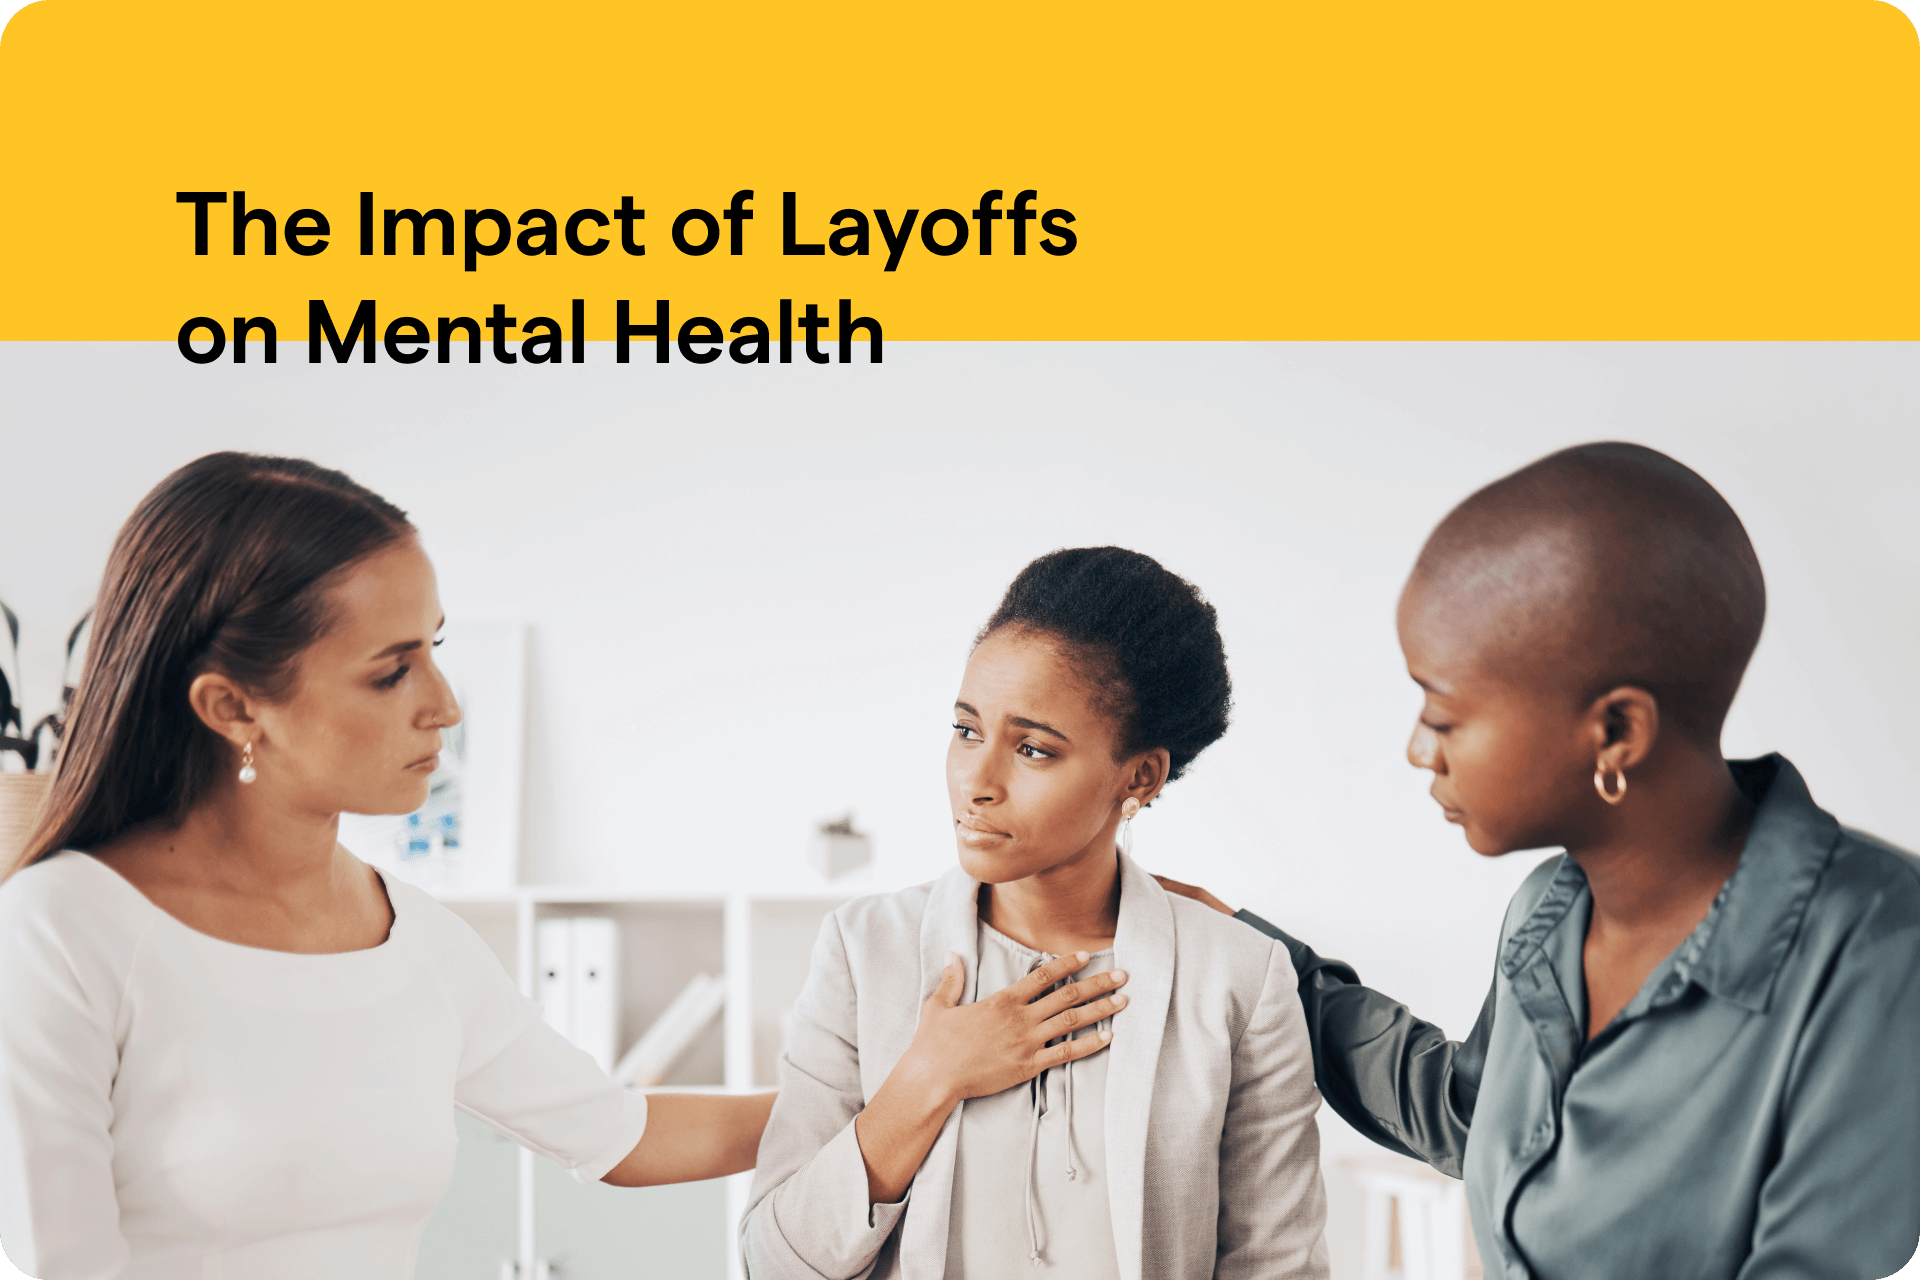 The impact of layoffs on mental health